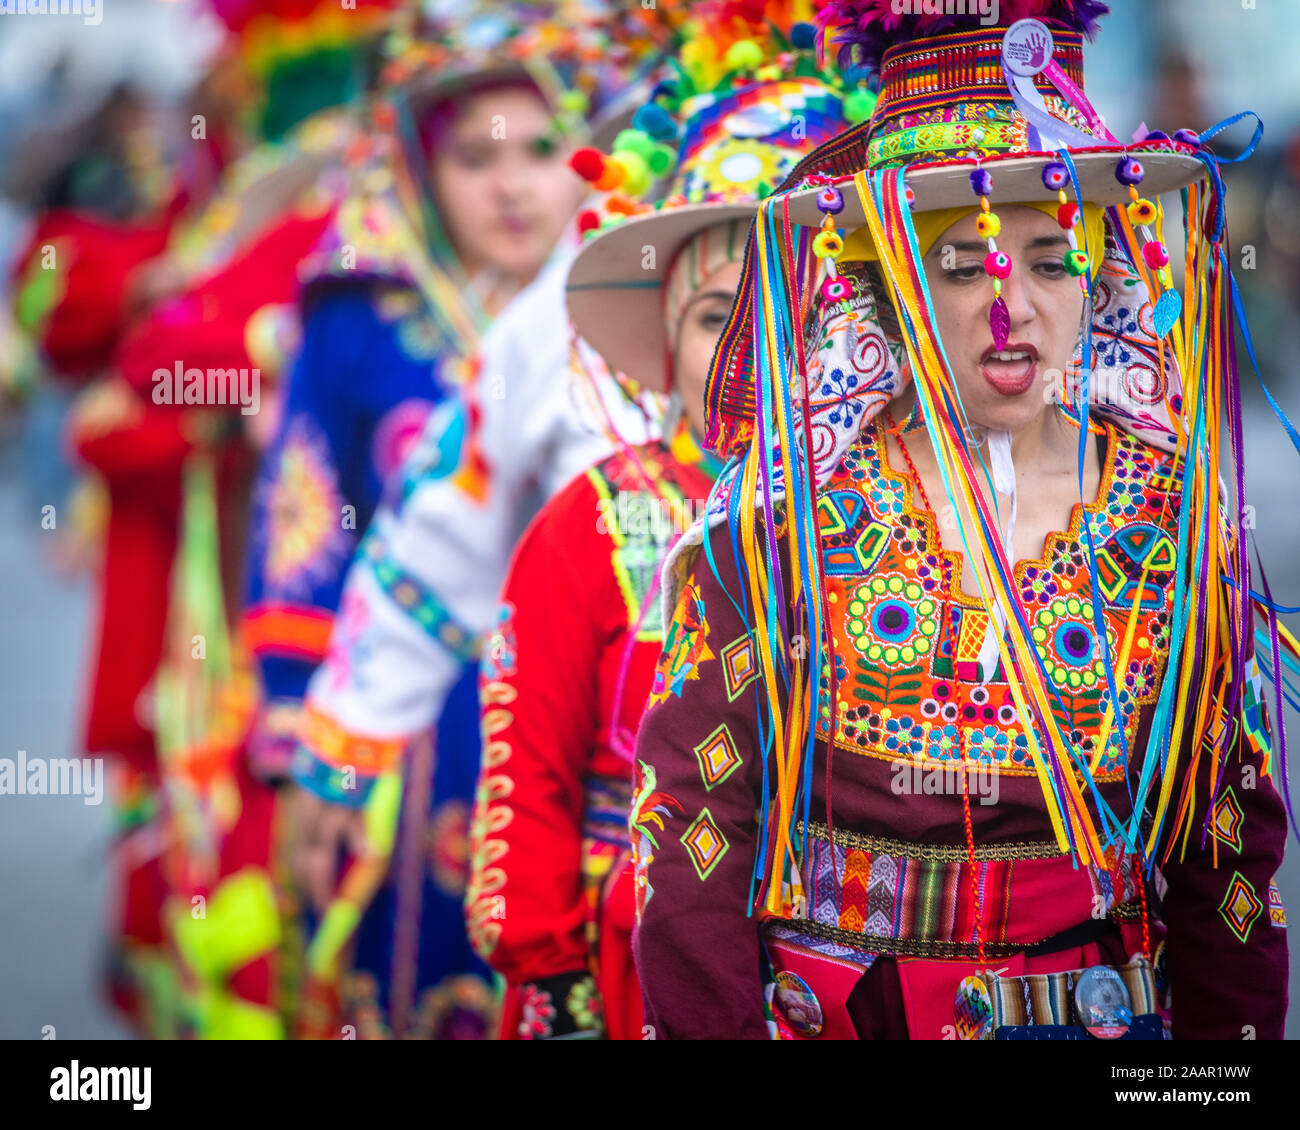 Chileans participating in traditional festival costumes, Valparaiso, Chile. Stock Photo